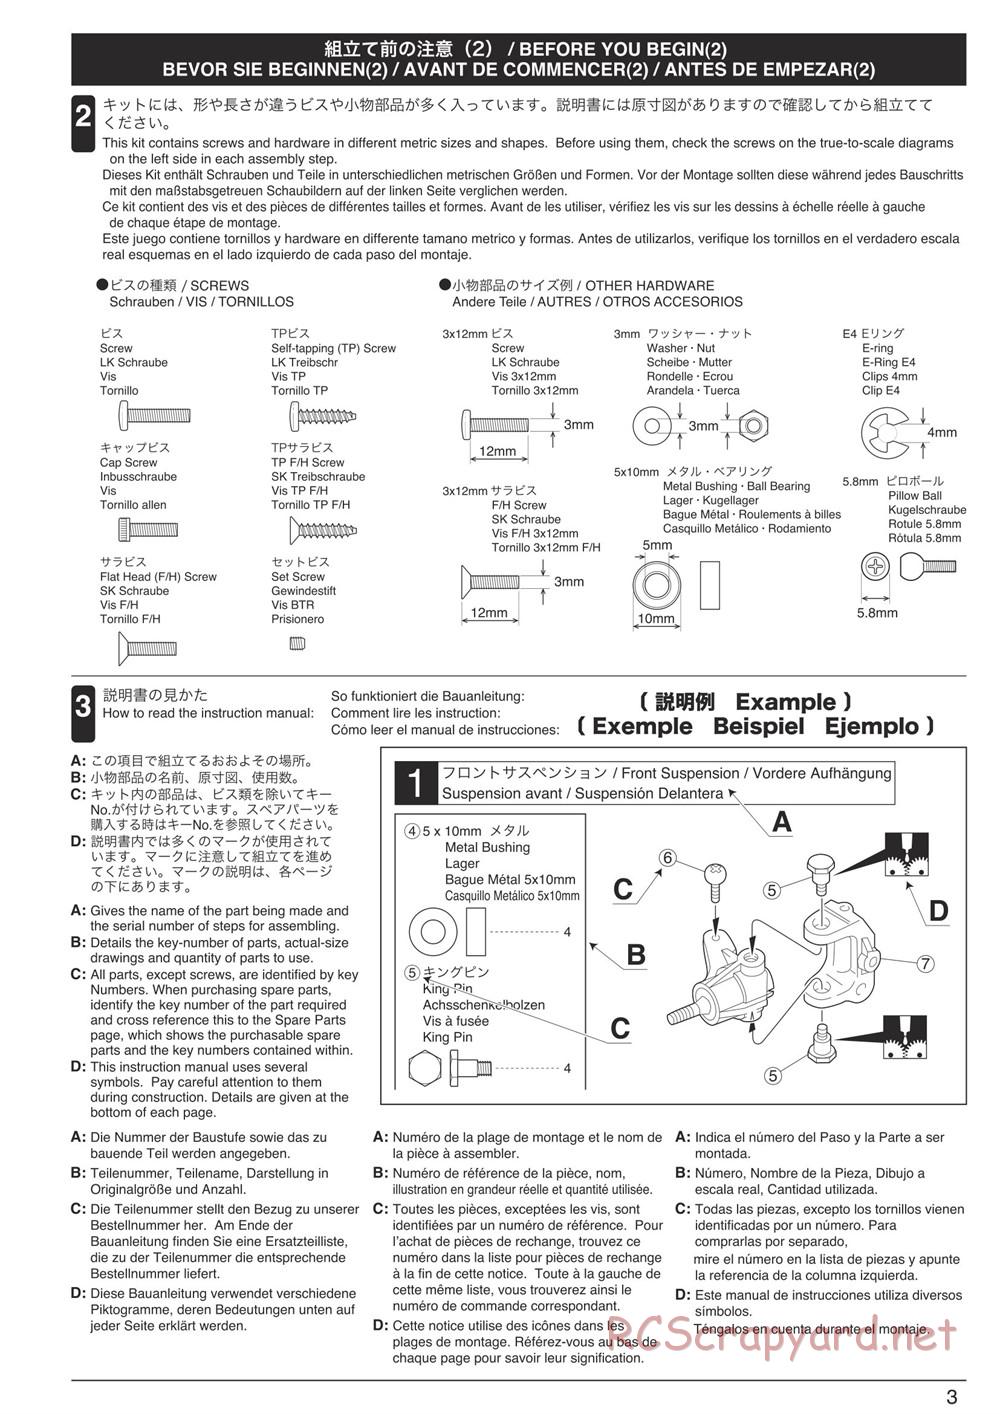 Kyosho - Inferno Neo 3.0 - Manual - Page 3